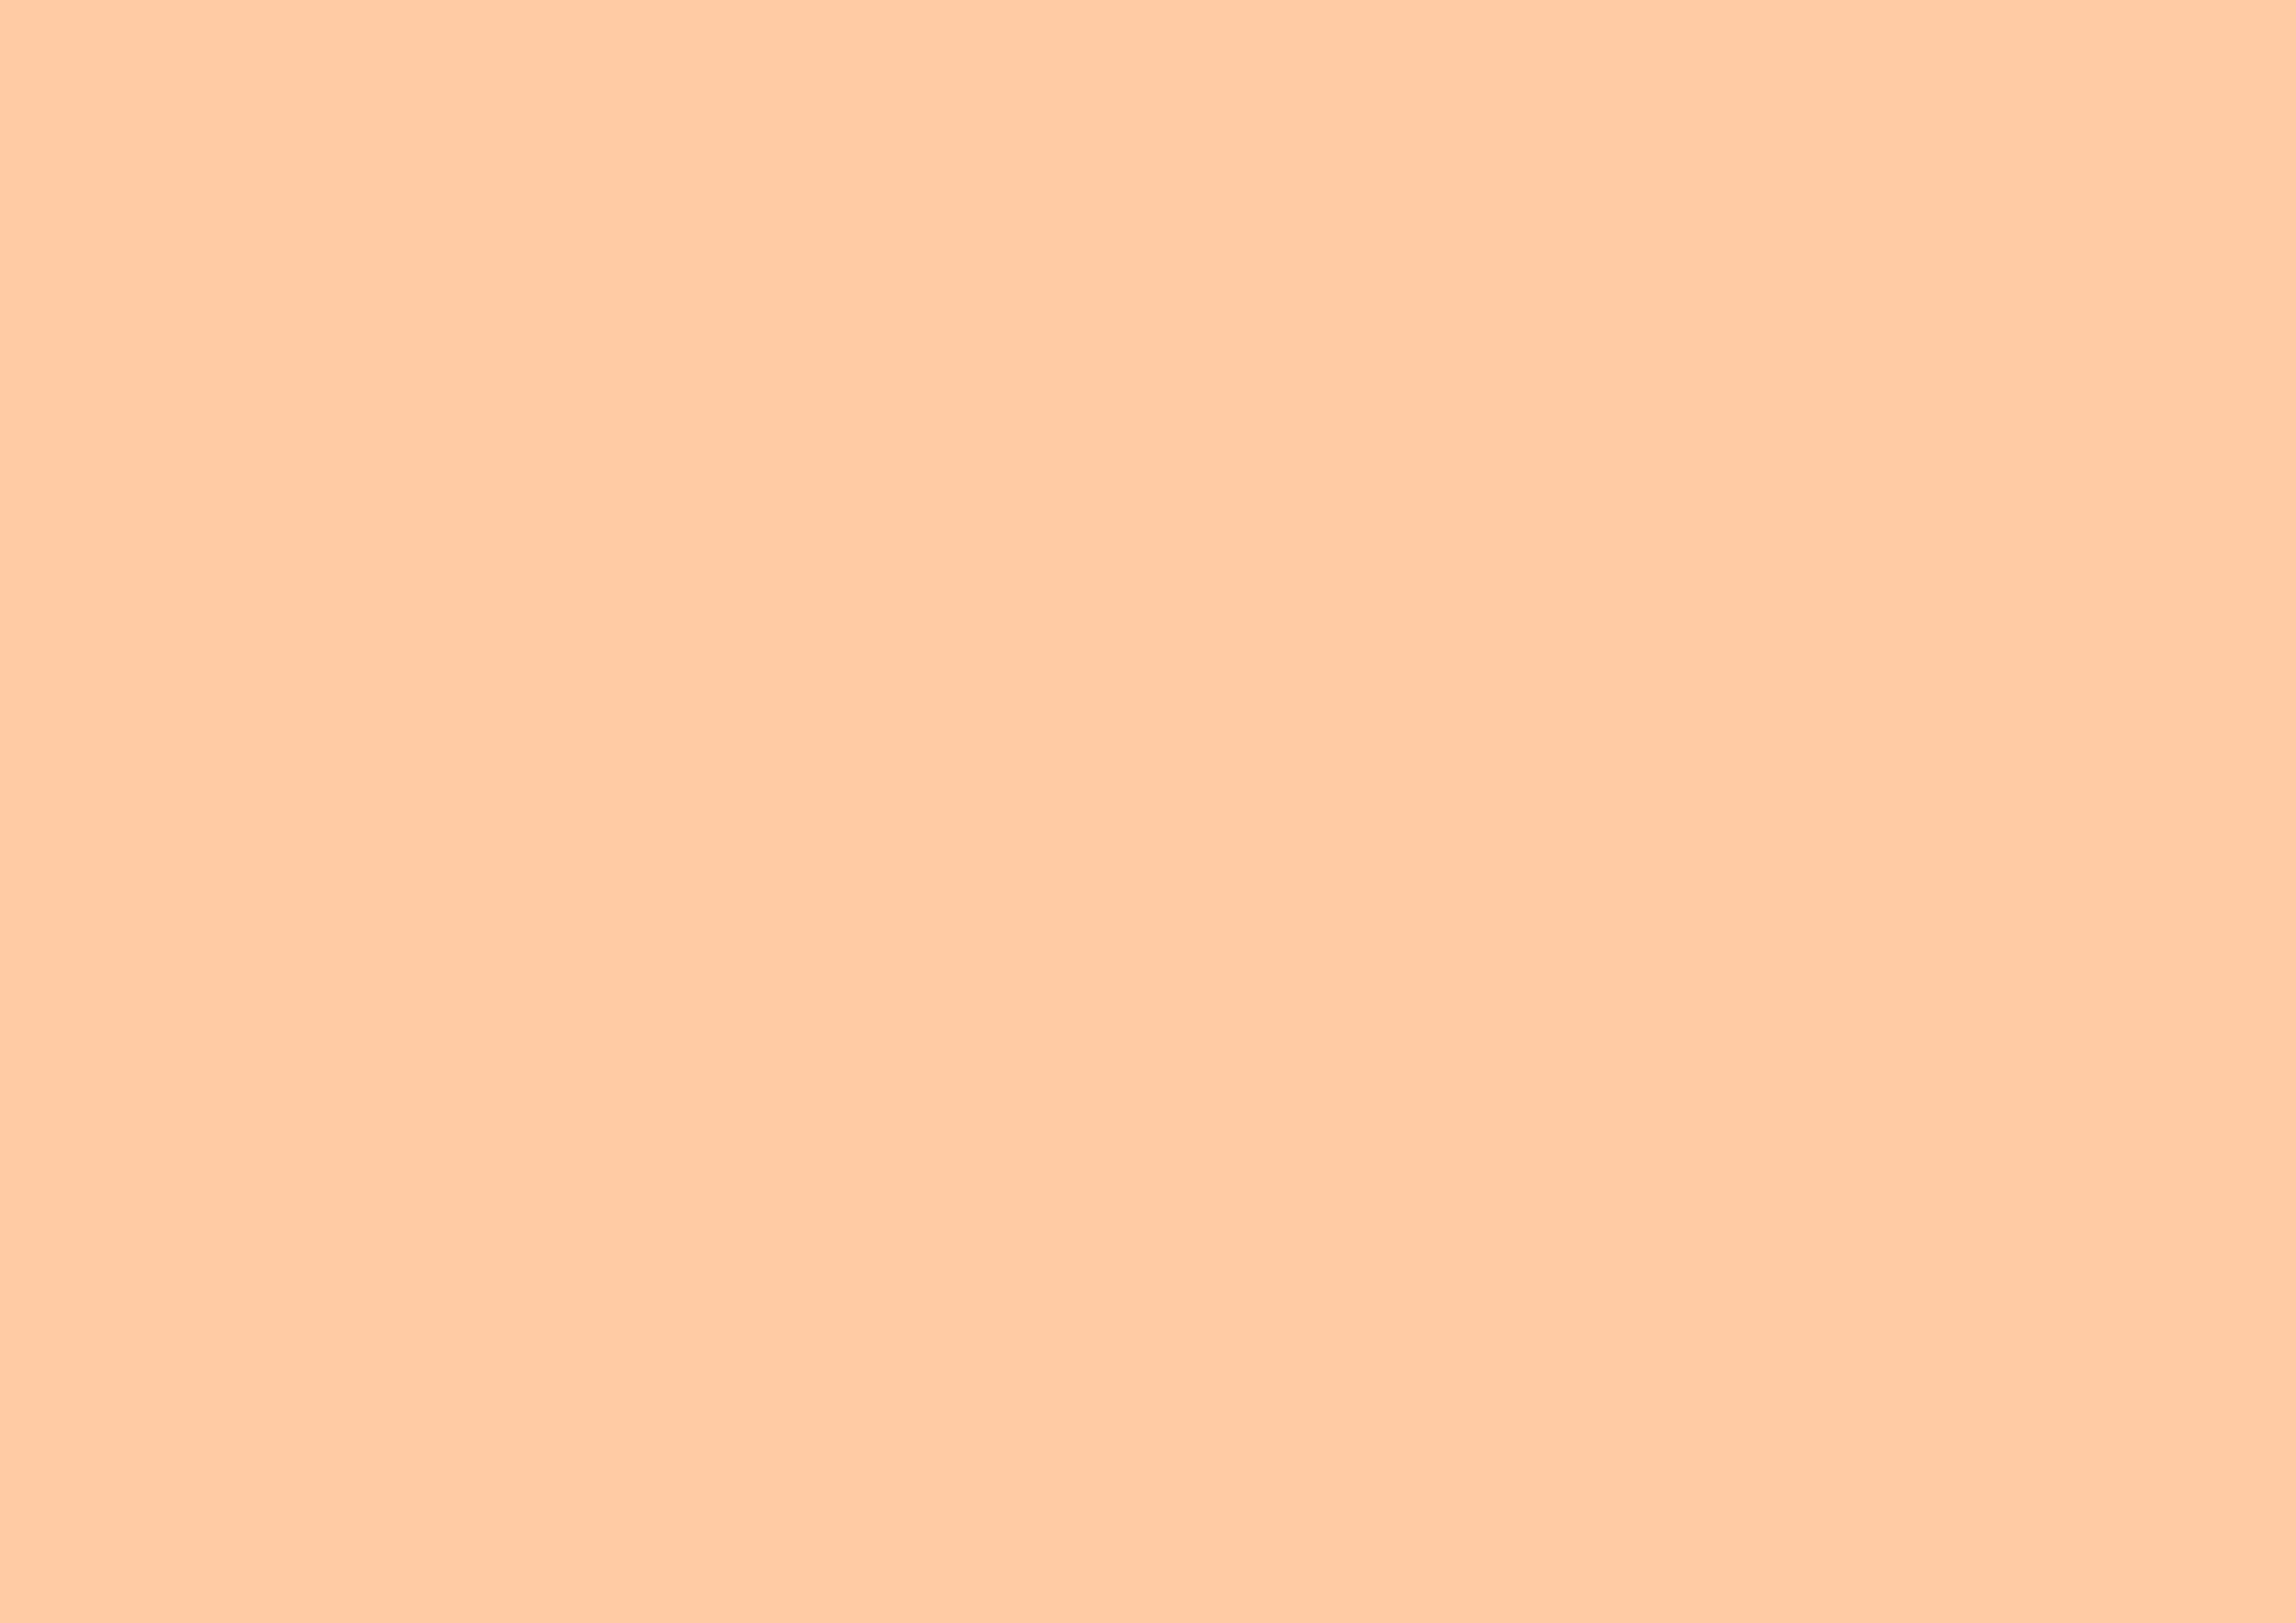 3508x2480 Deep Peach Solid Color Background 3508x2480